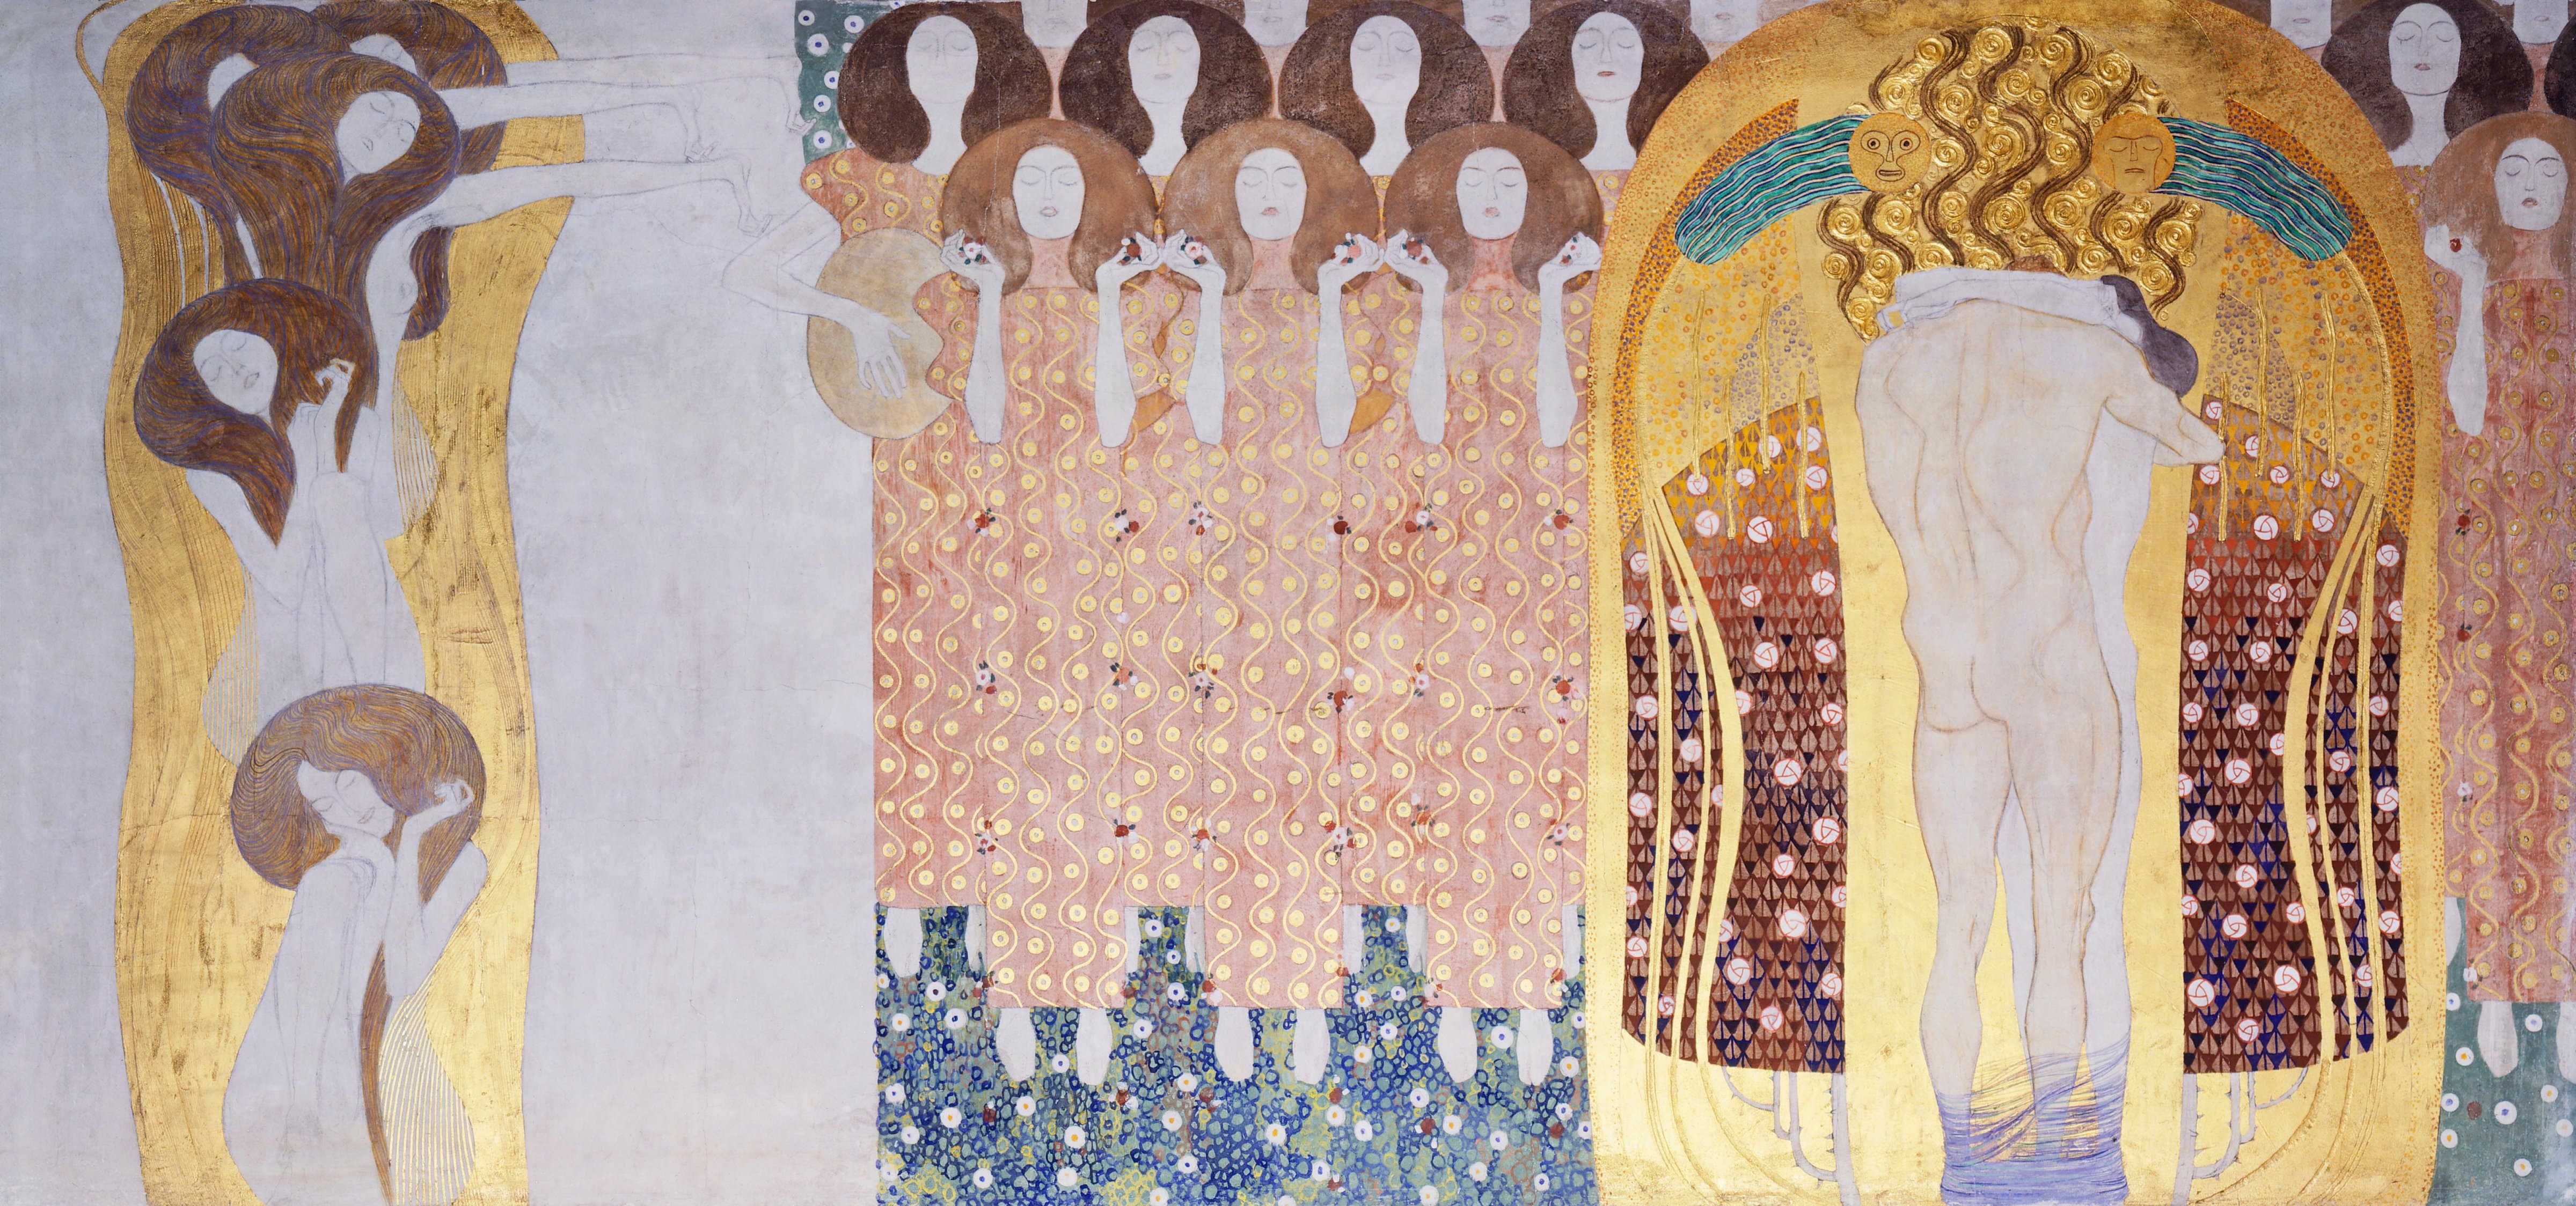 The Beethoven Frieze: The longing for happiness, 1902, by Gustav Klimt (1862-1918). (Photo by DeAgostini/Getty Images)